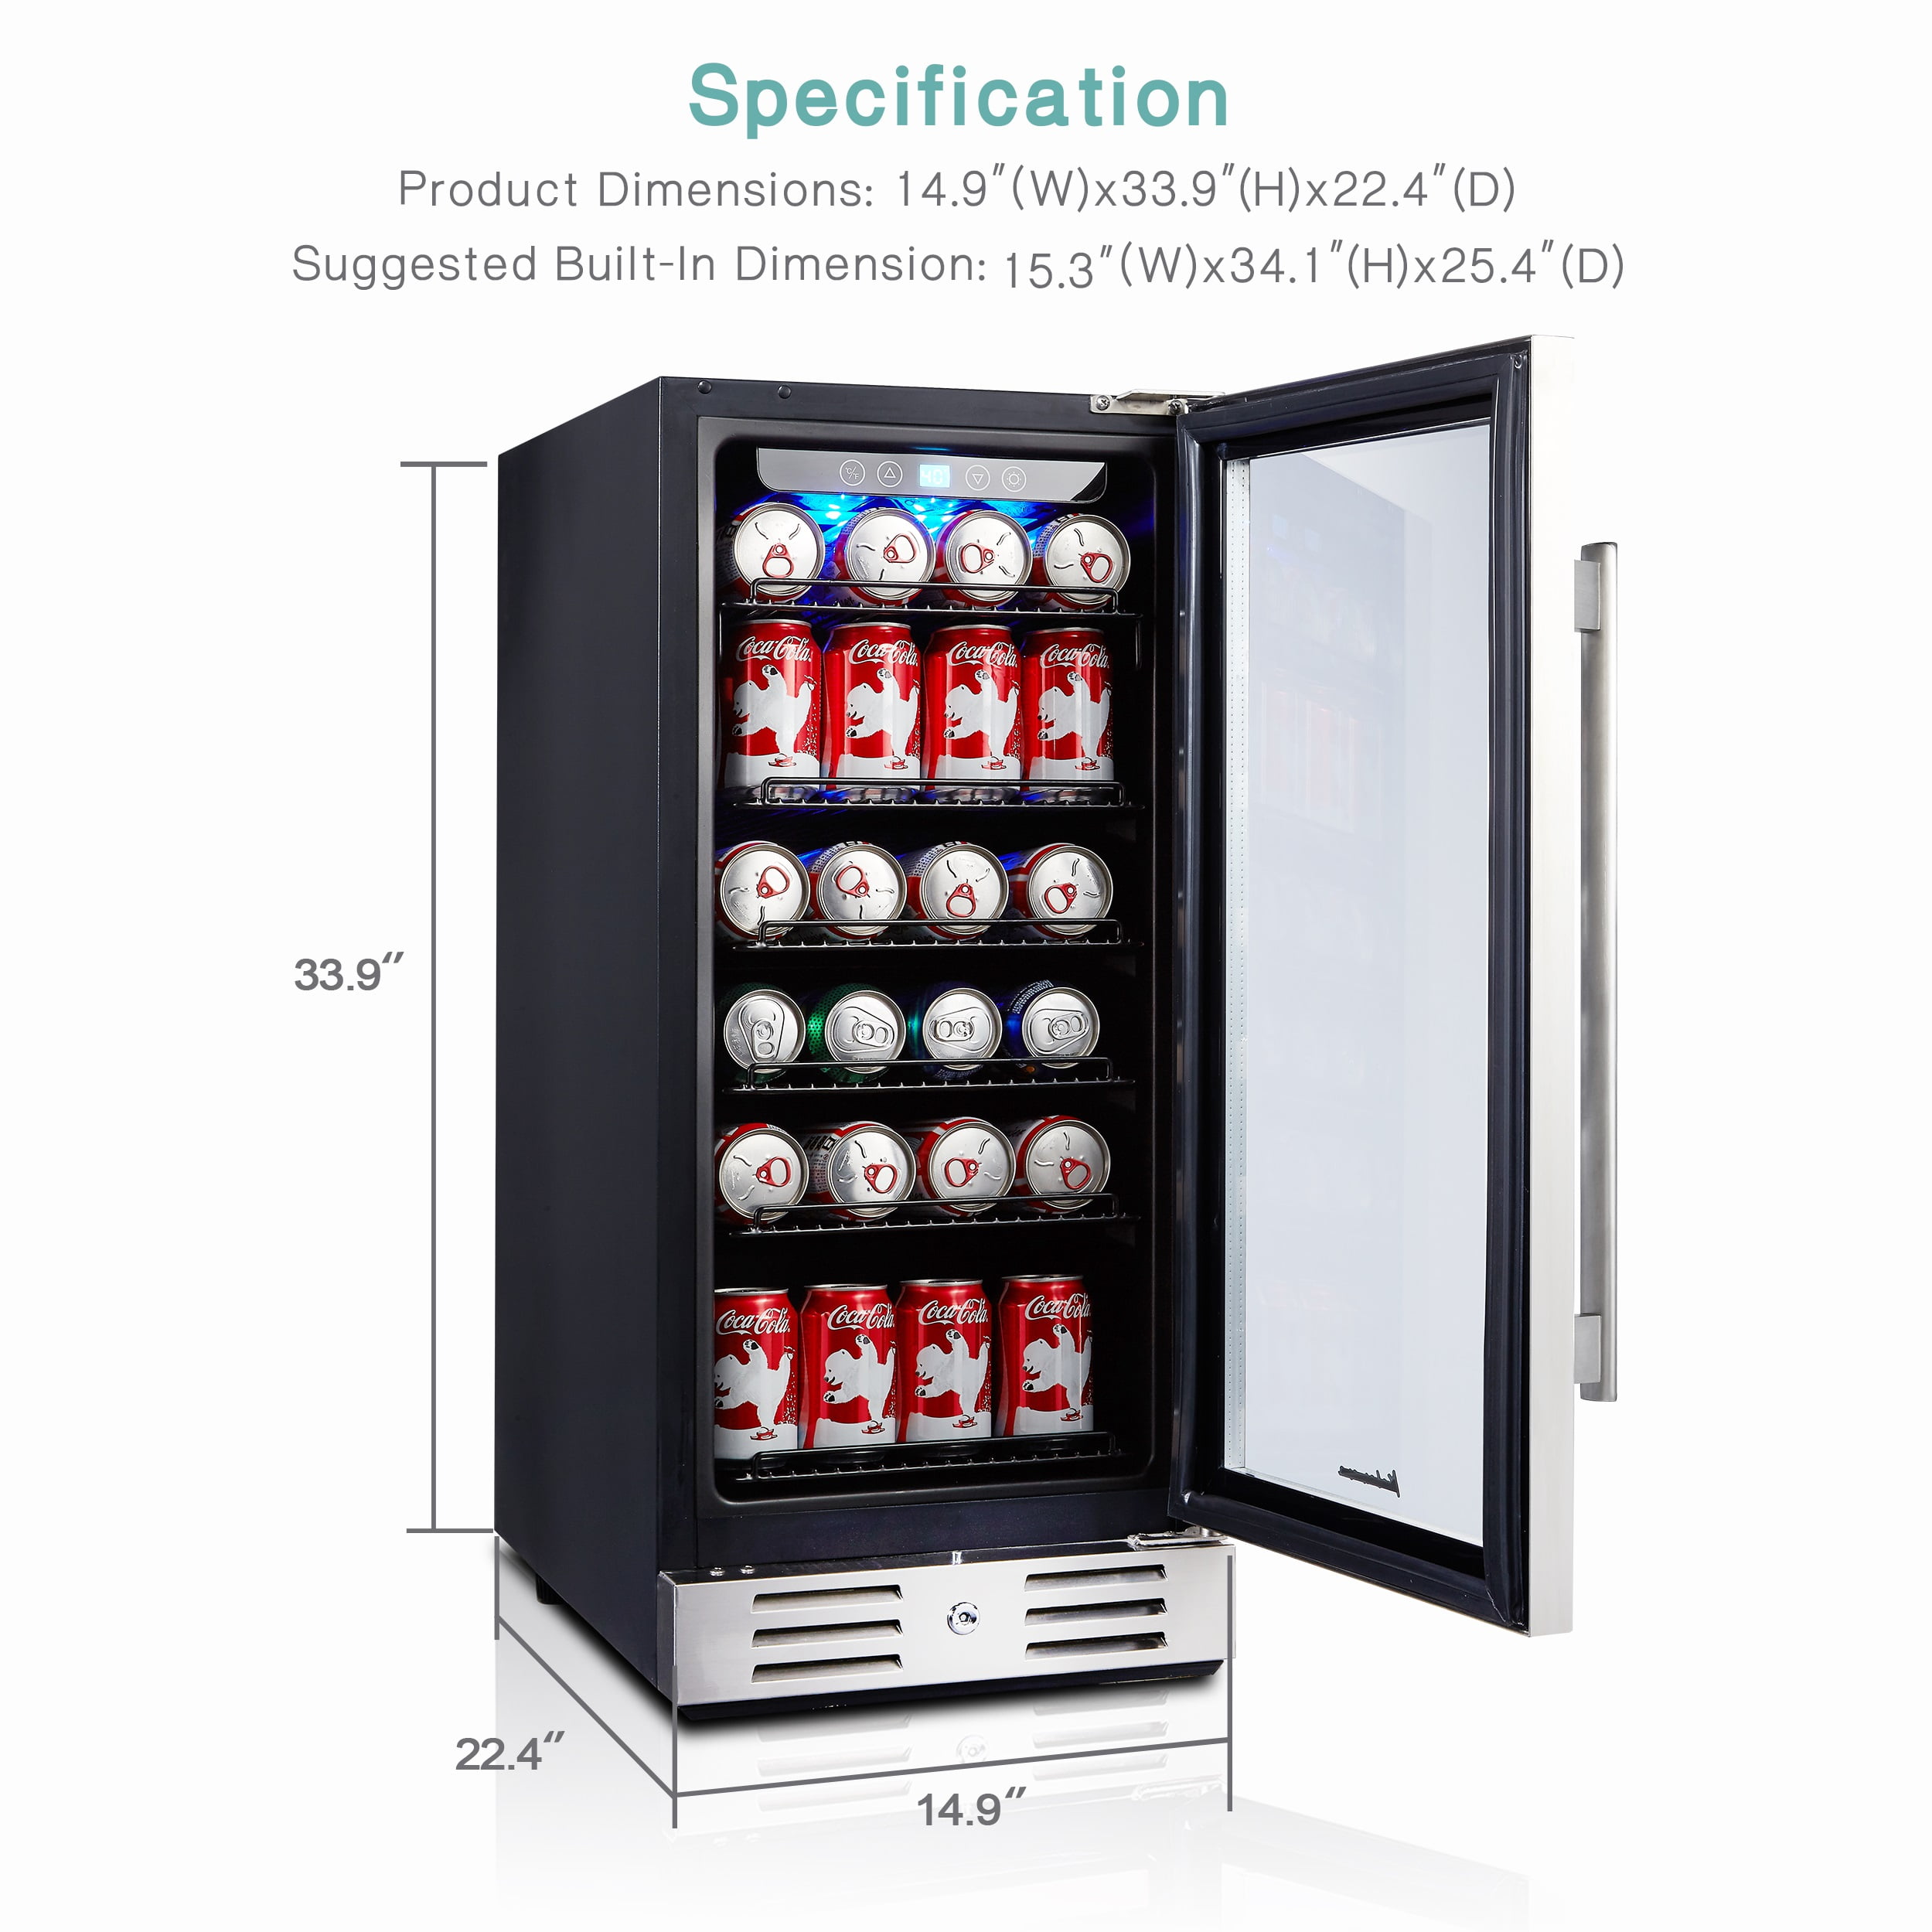 96 Cans Capacity Kalamera Beverage Cooler and Fridge Fit Perfectly into 15 inch Space Under Counter or Freestanding Water for Soda Beer or Wine For Kitchen or Bar with Blue Interior Light 